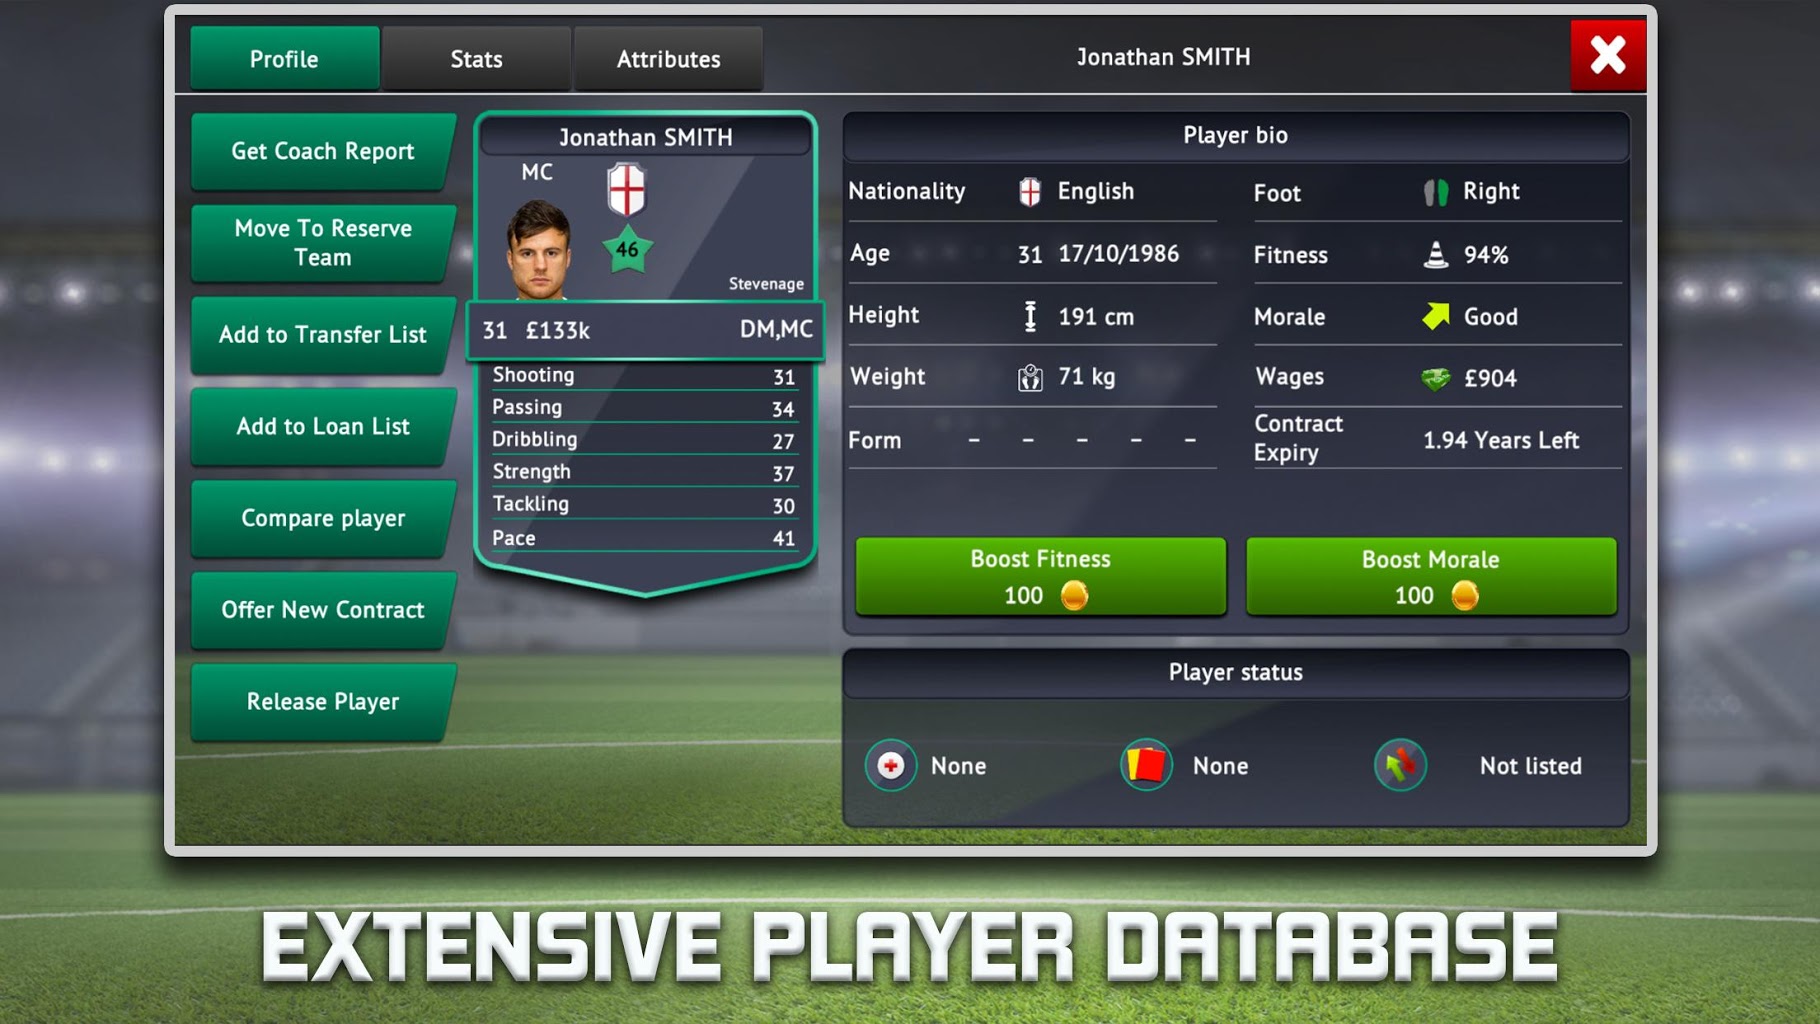 download soccer manager 2012 for free